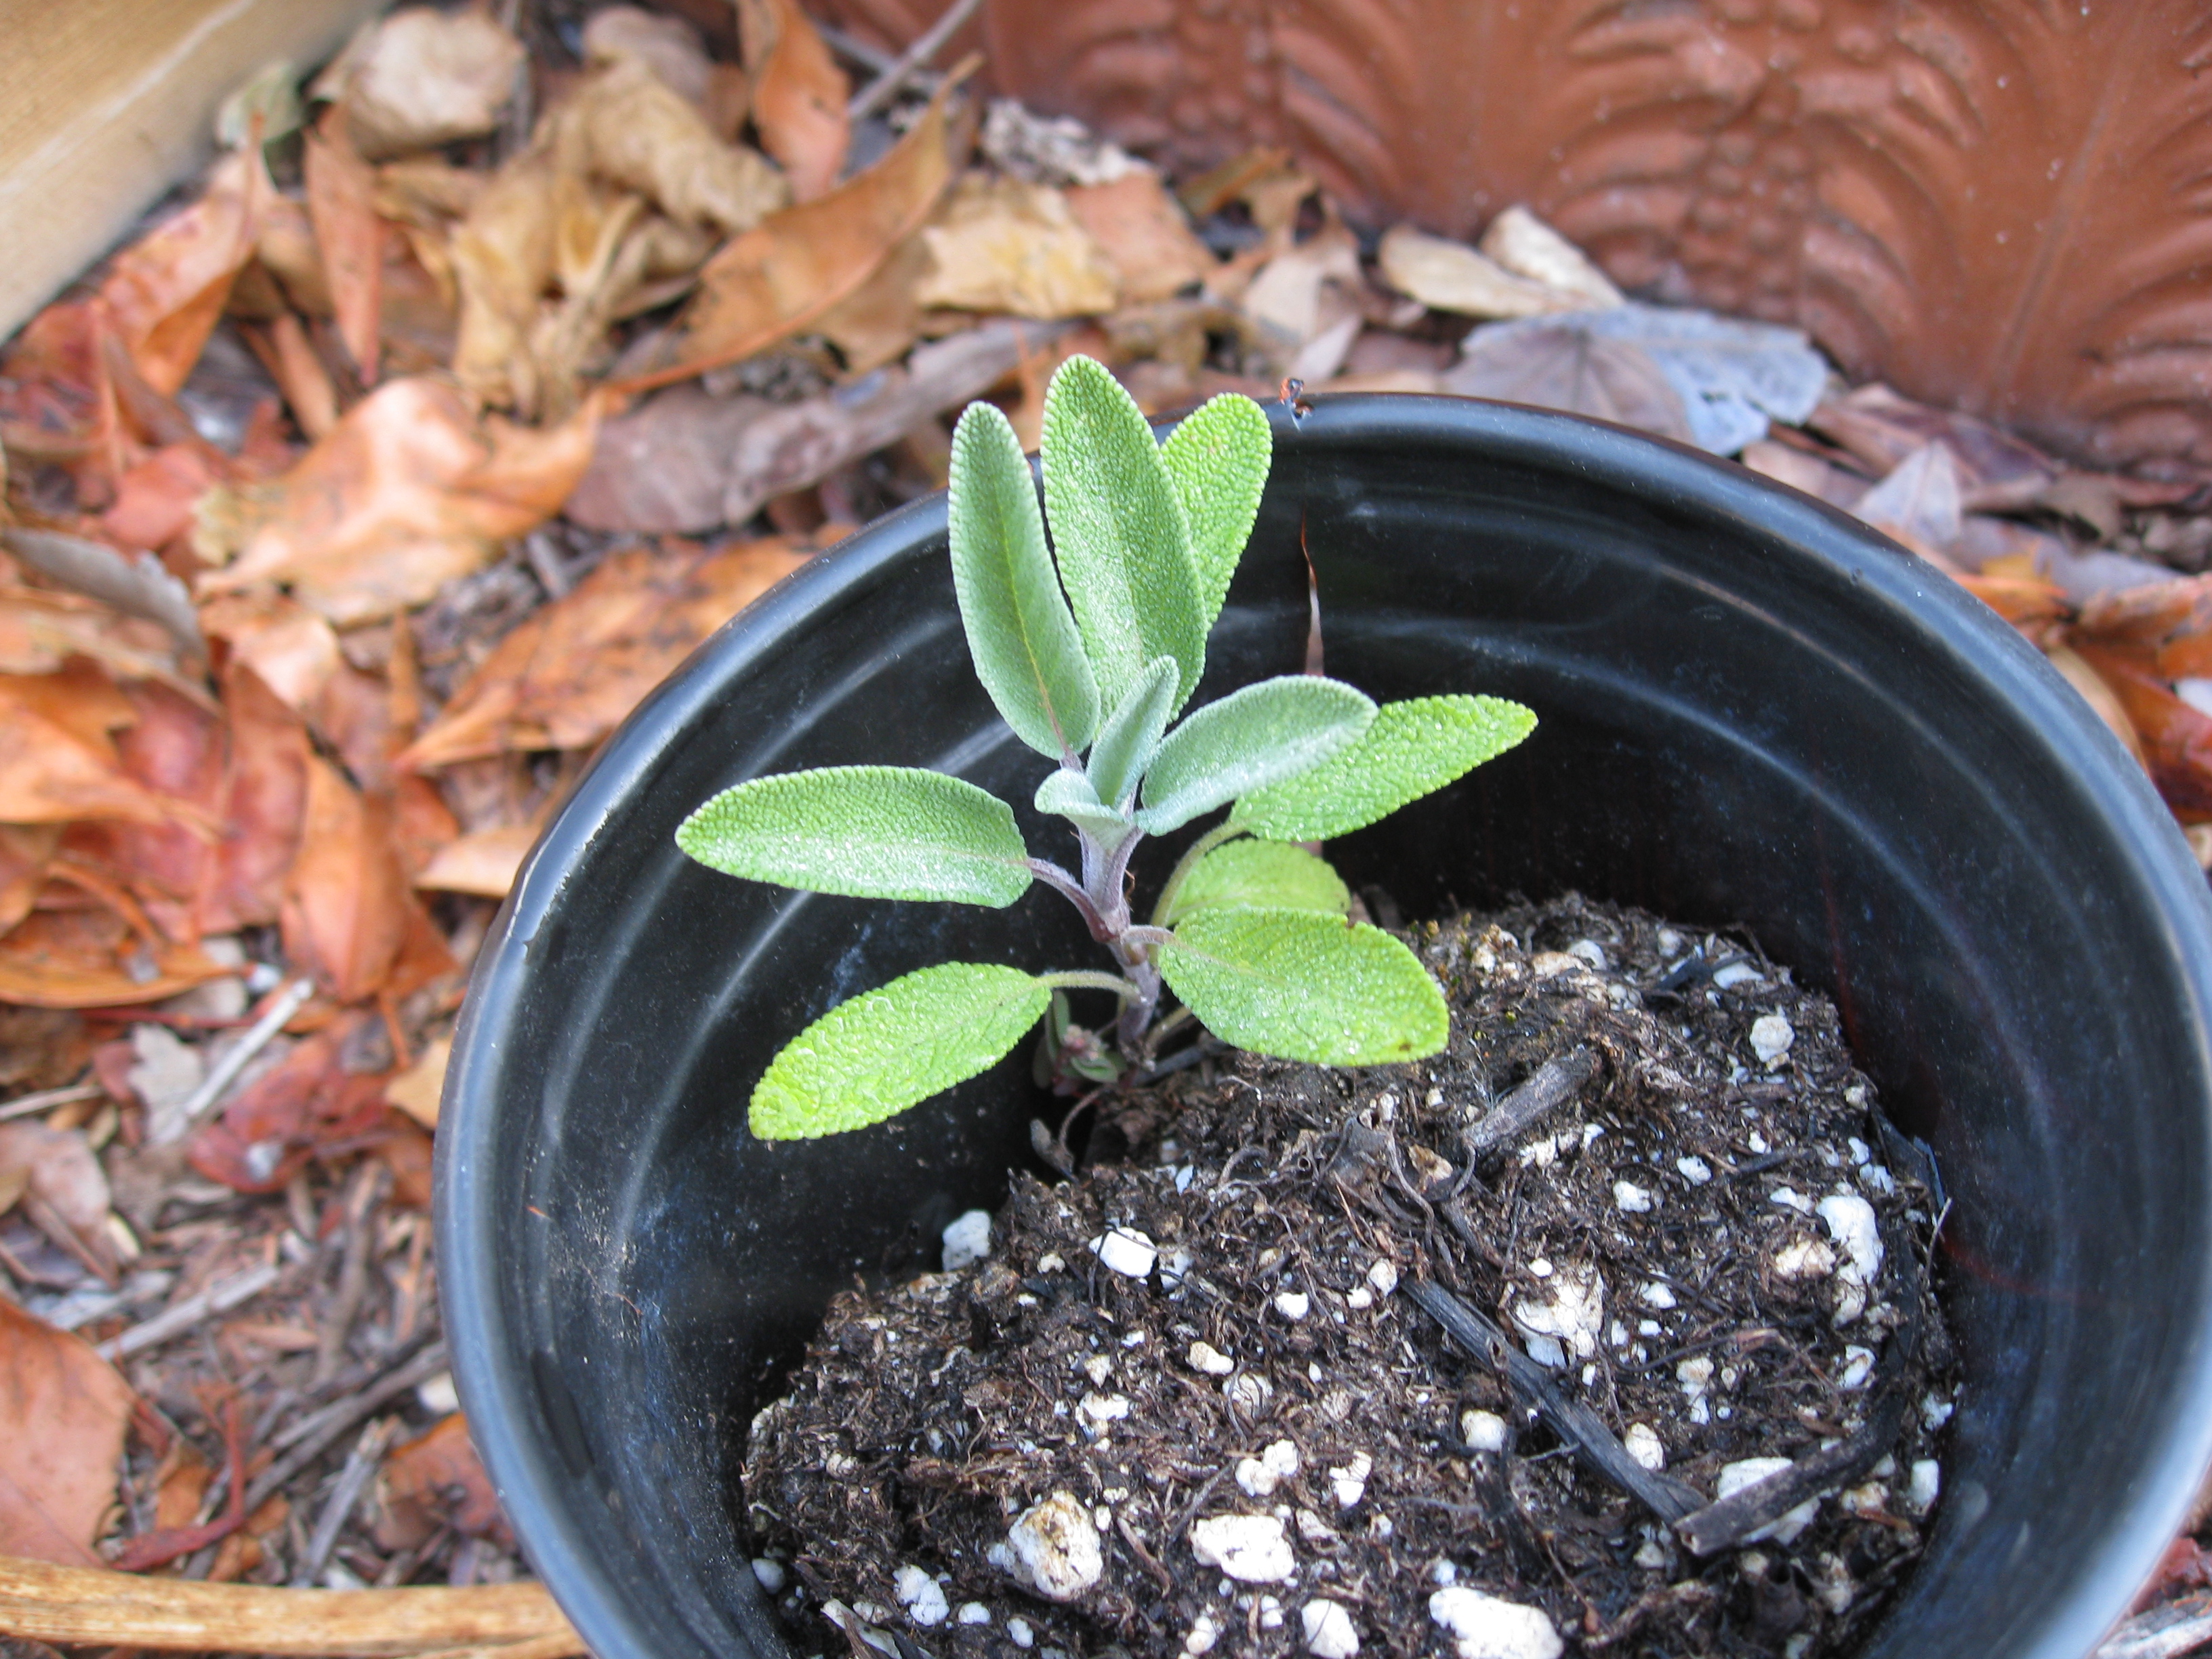 Sage volunteered in a small pot. We'll transplant it out soon.